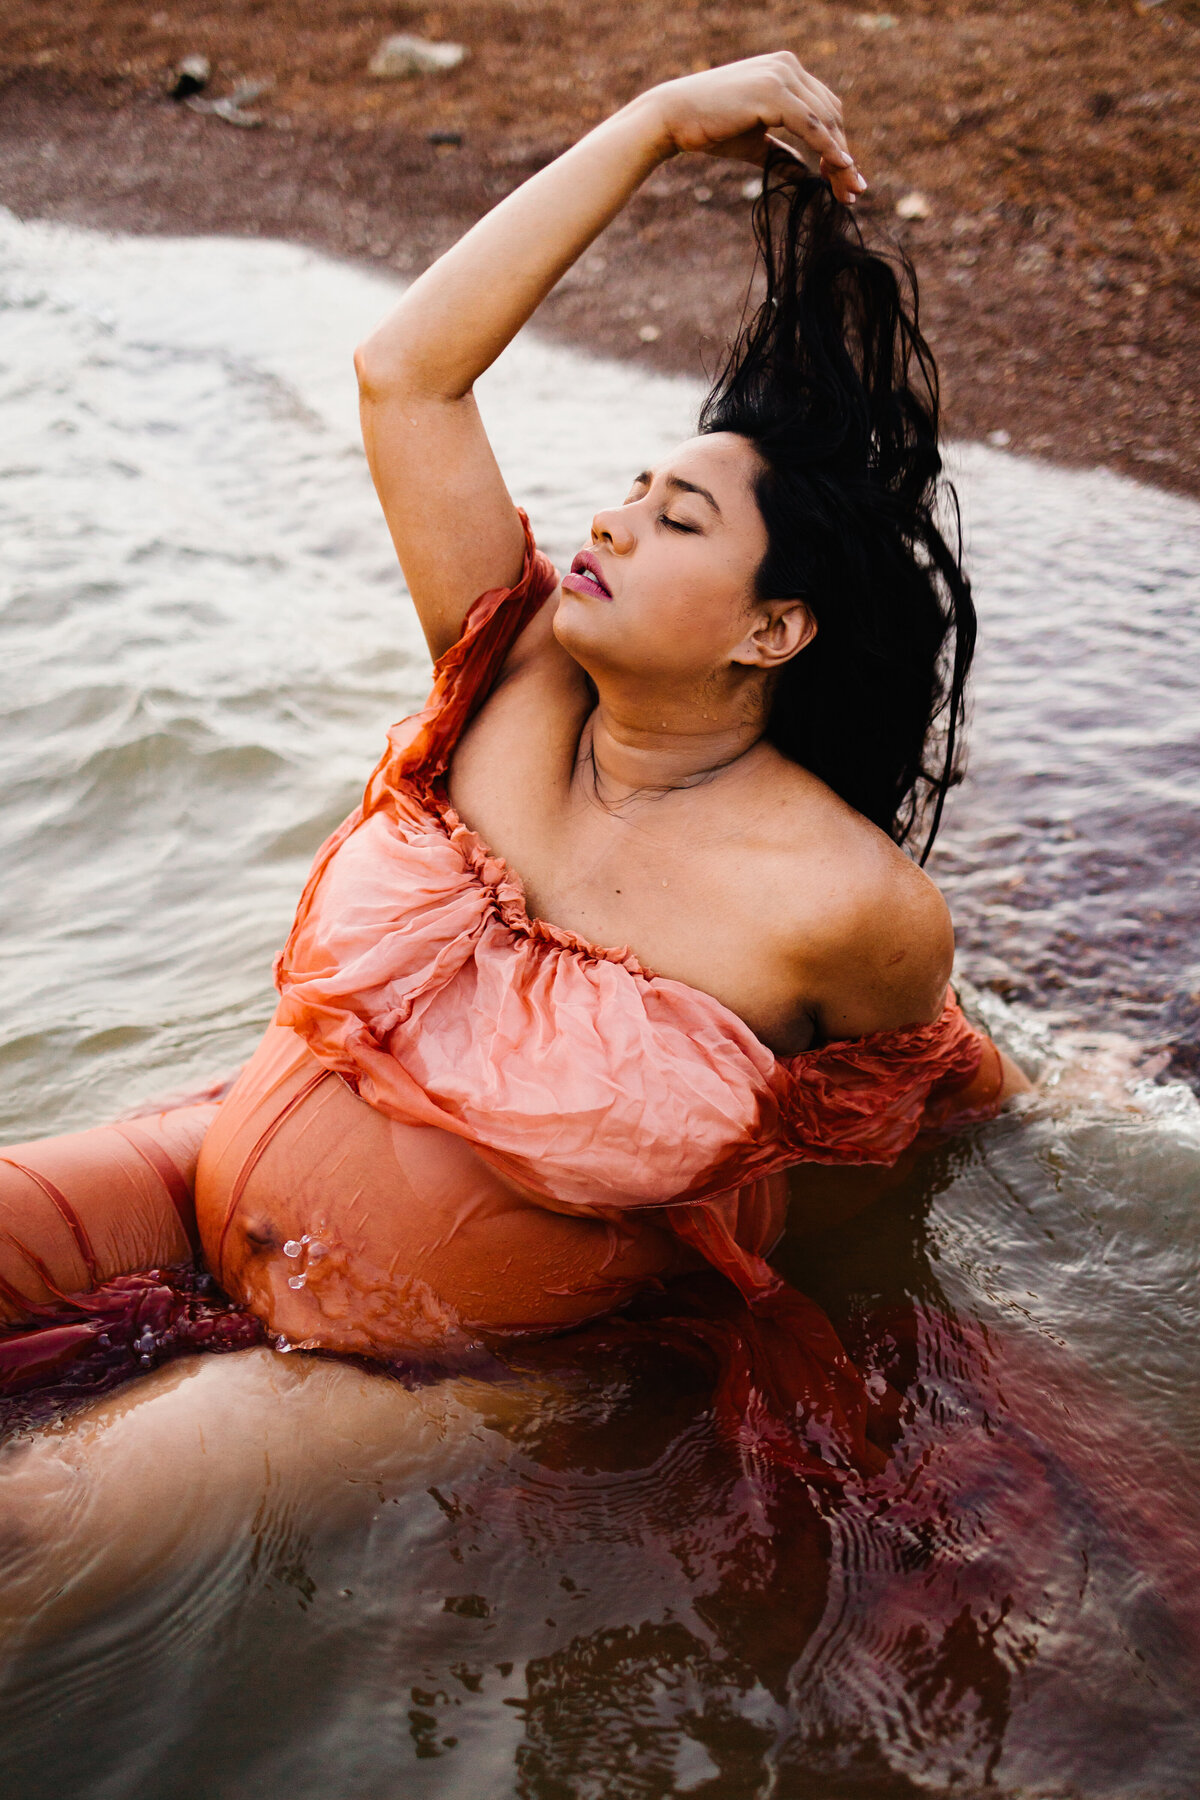 A stunning image by a maternity photographer in Albuquerque. The pregnant woman stands gracefully in a clean lake, wearing a long orange dress. She holds her hair with one hand on top, her eyes closed, capturing a serene and peaceful moment.